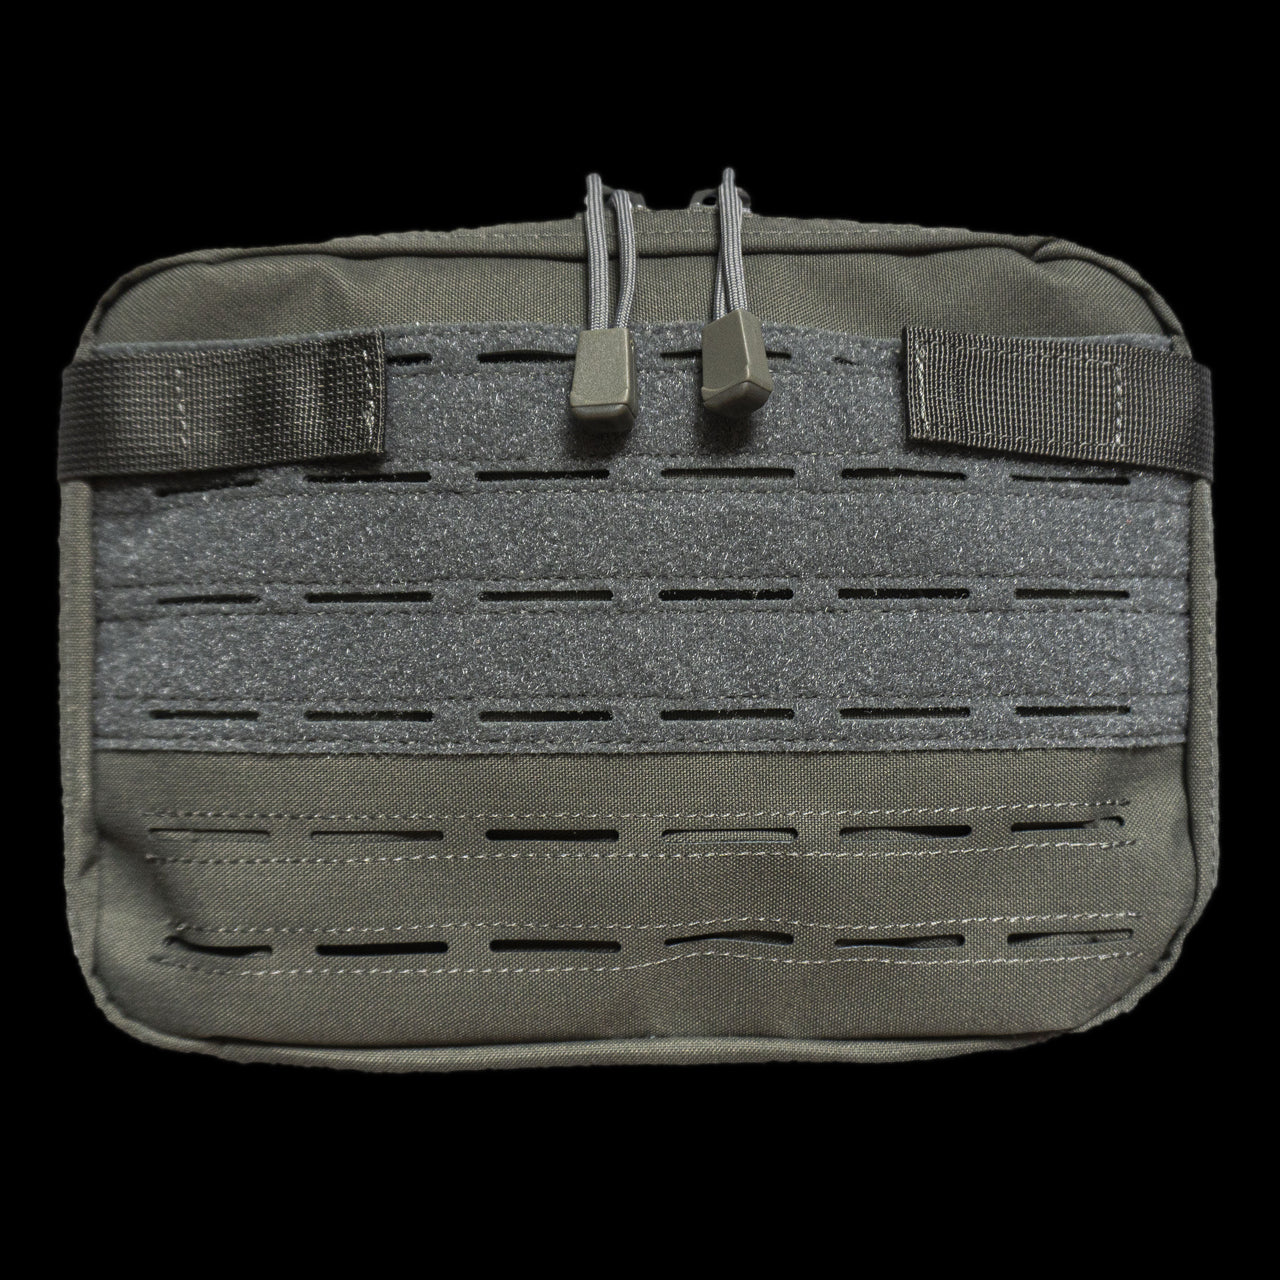 NV02 Navex Pouch - FORTITUDE WORKS SINGAPORE